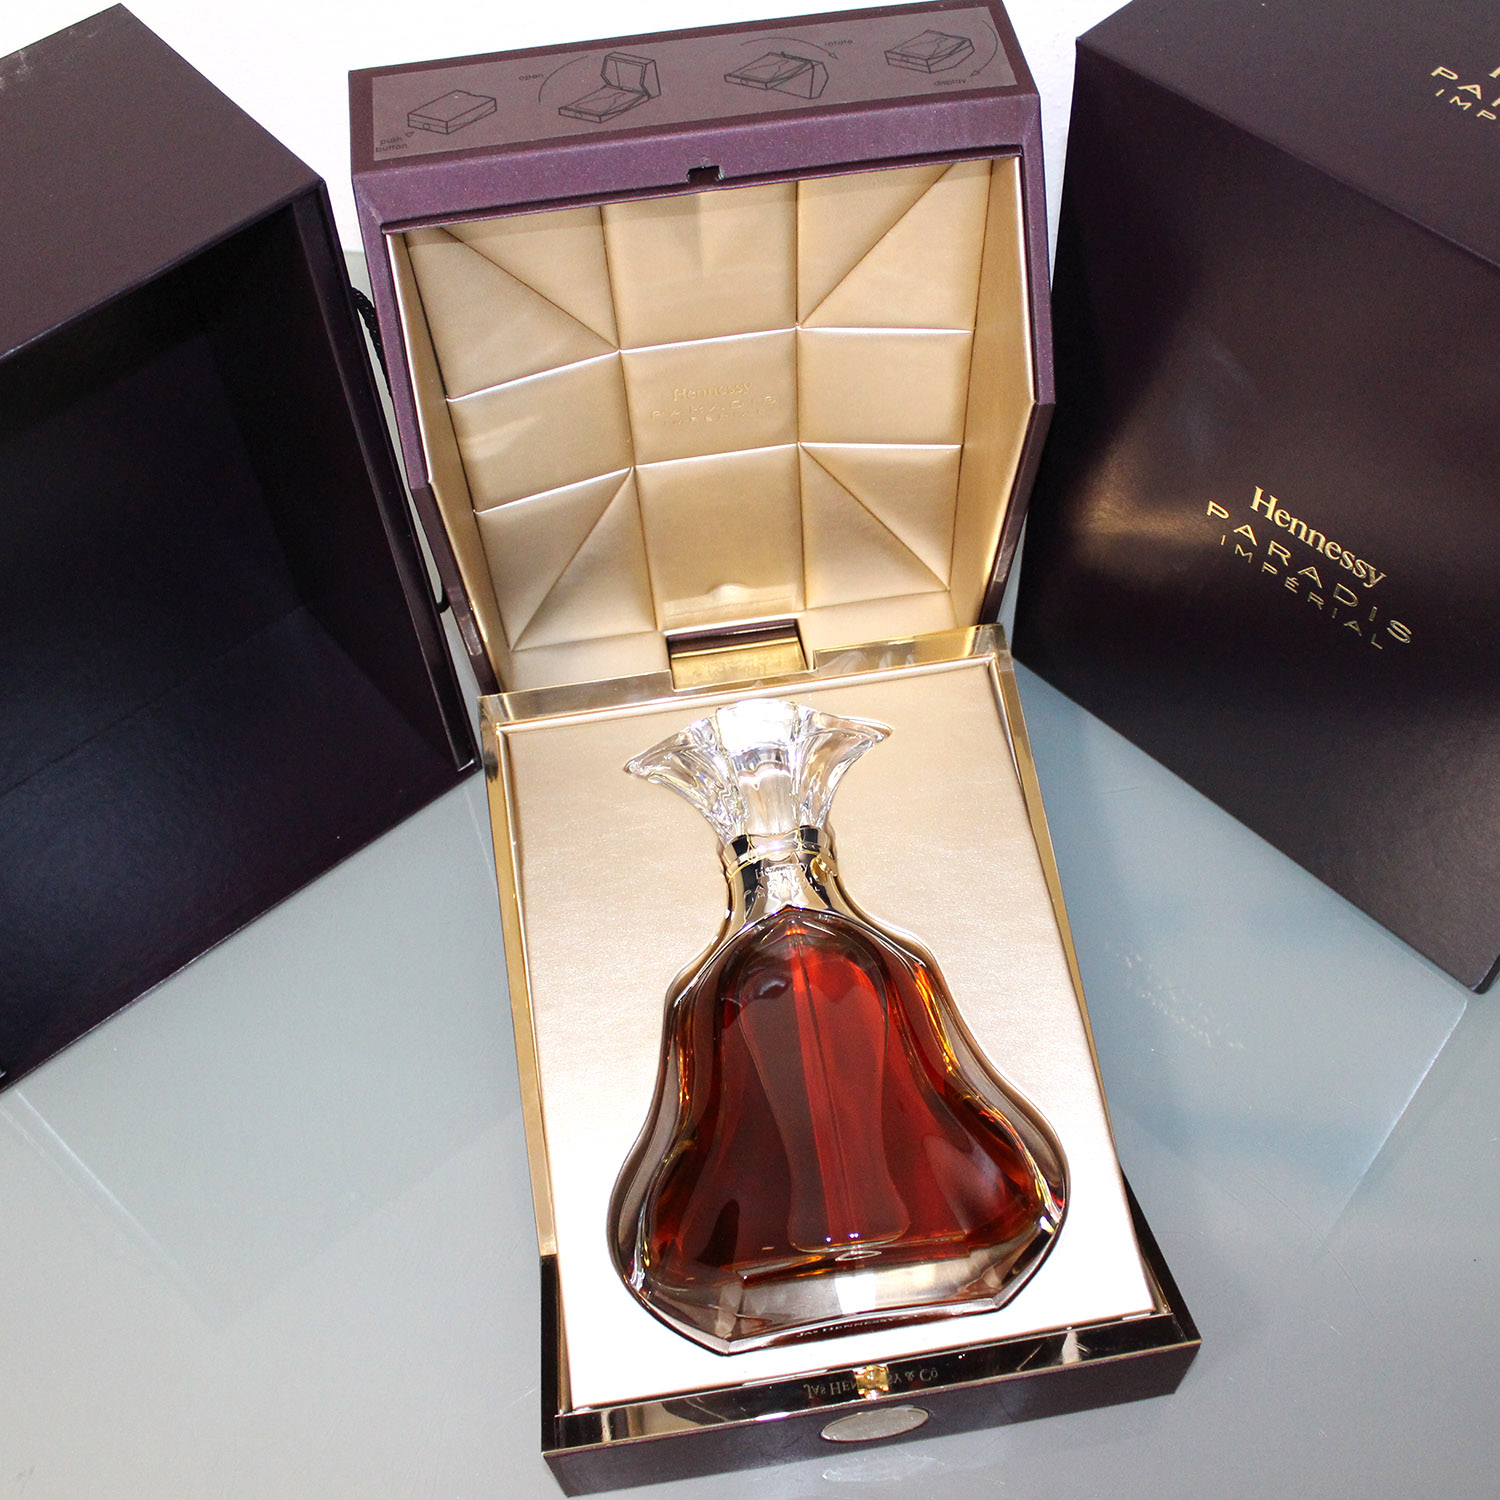 Hennessy Paradis Imperial Cognac 4